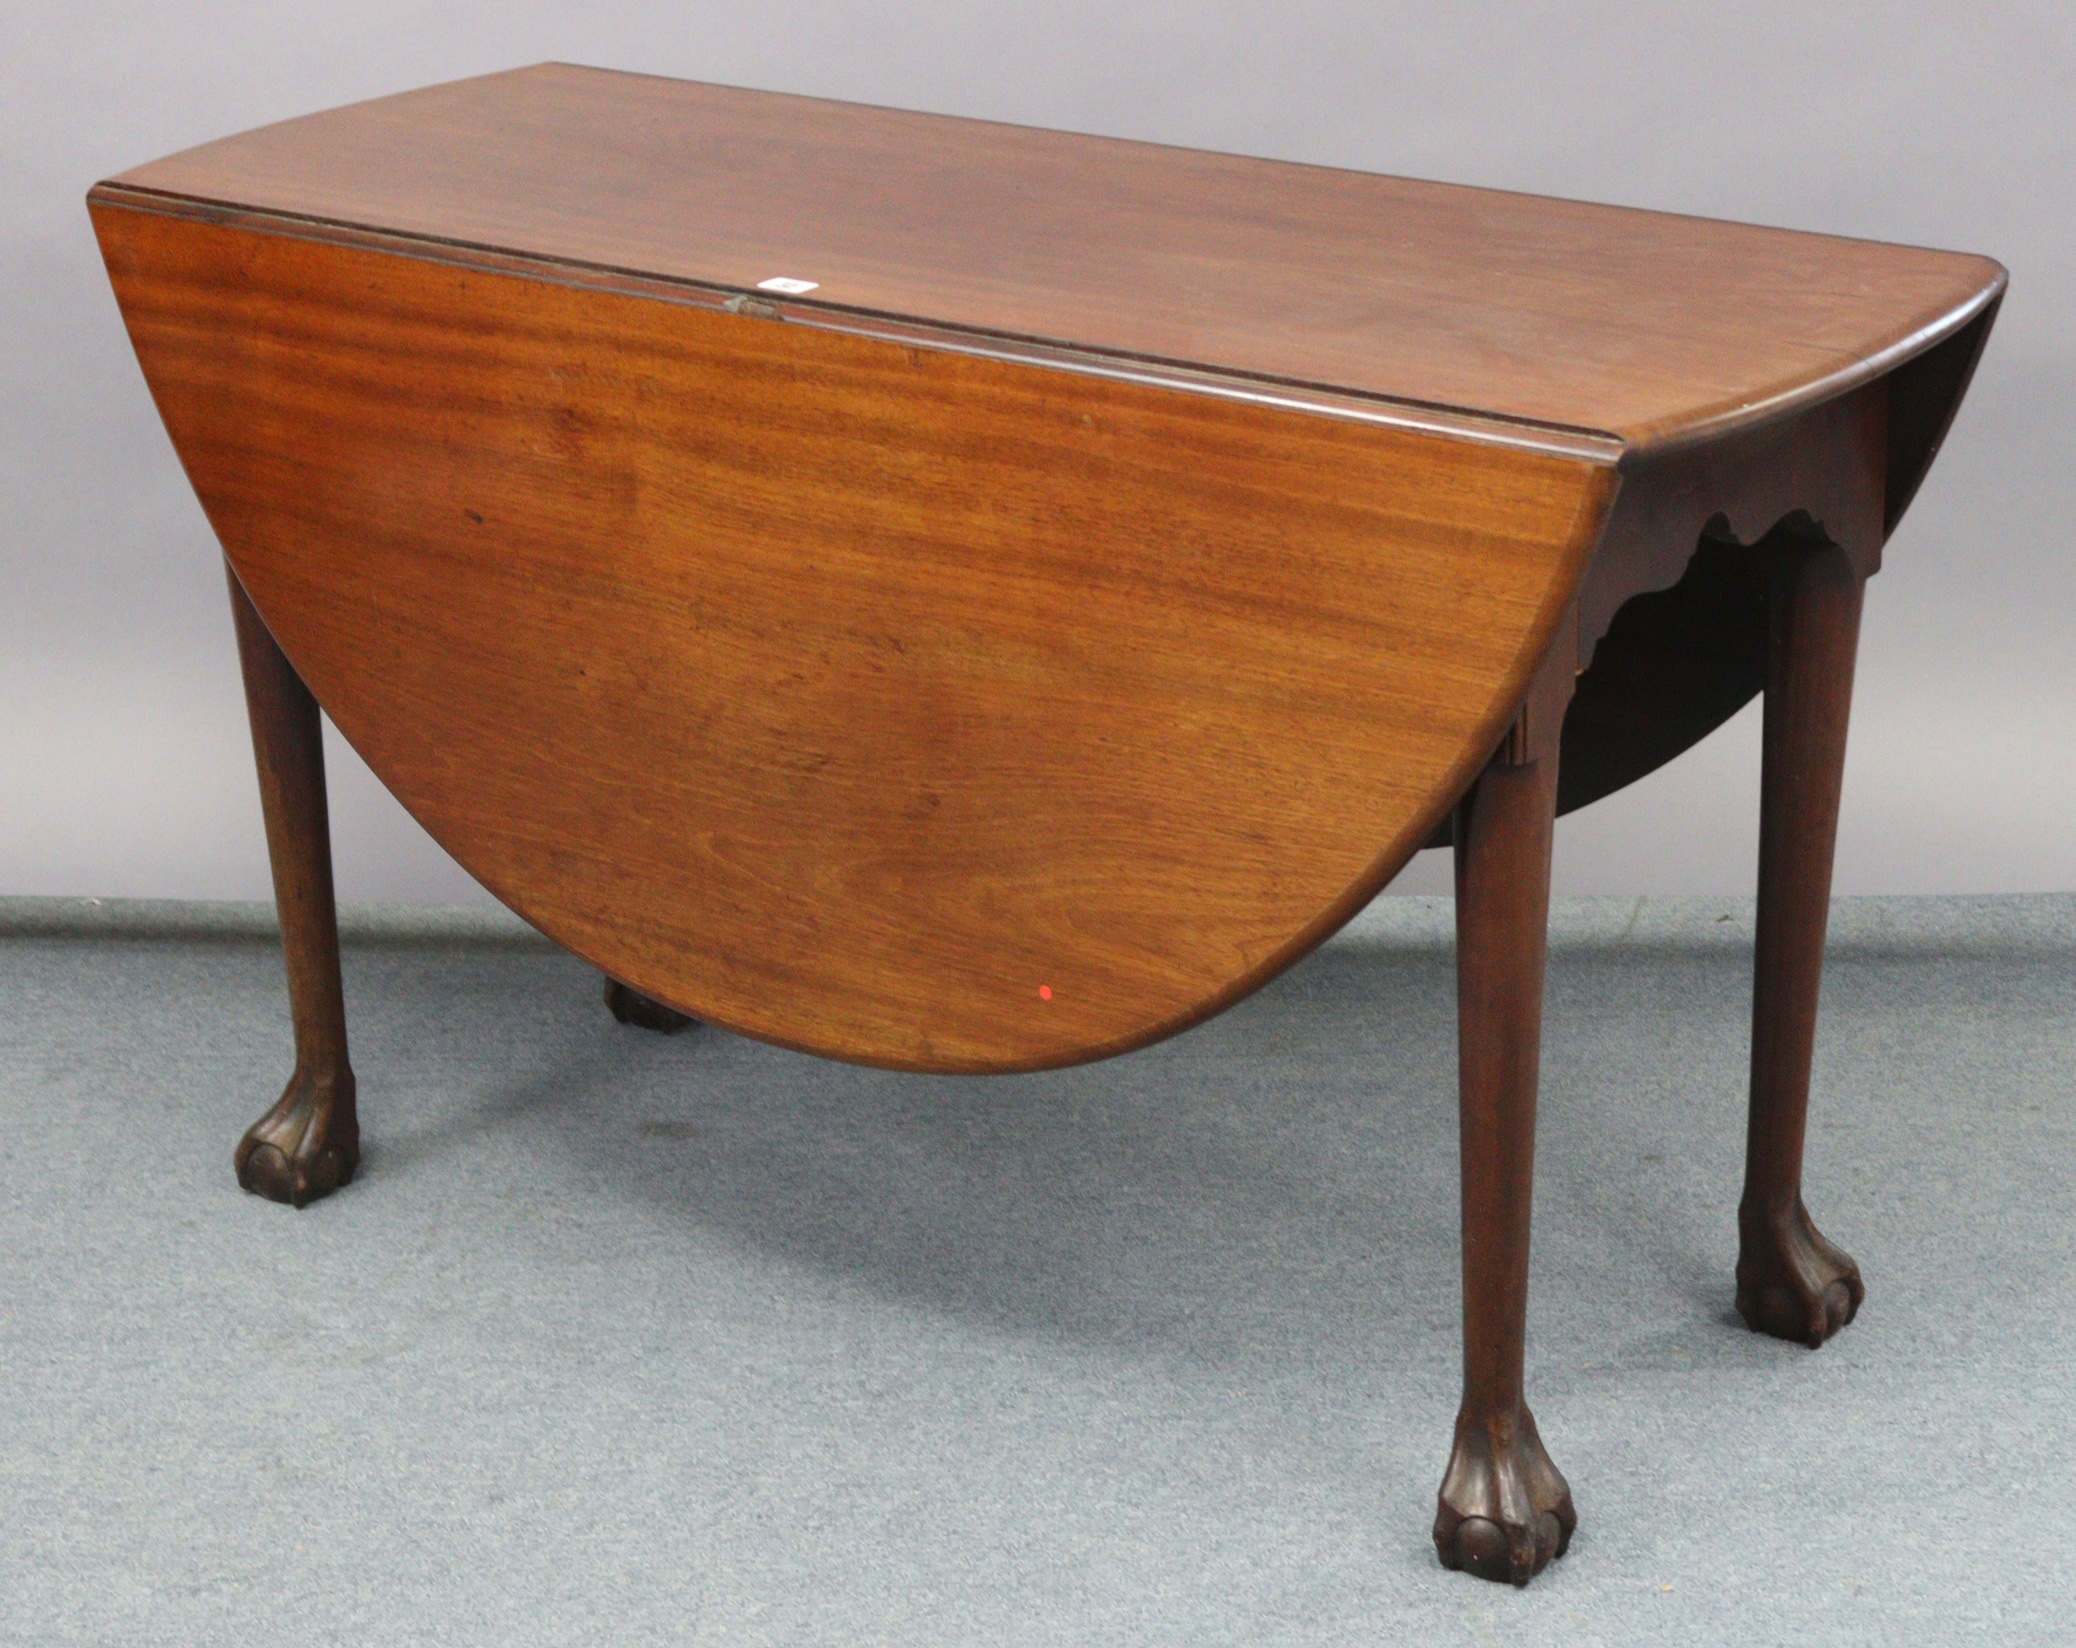 A late 19th century mahogany drop-leaf dining table, with oval top & on four round tapered legs with